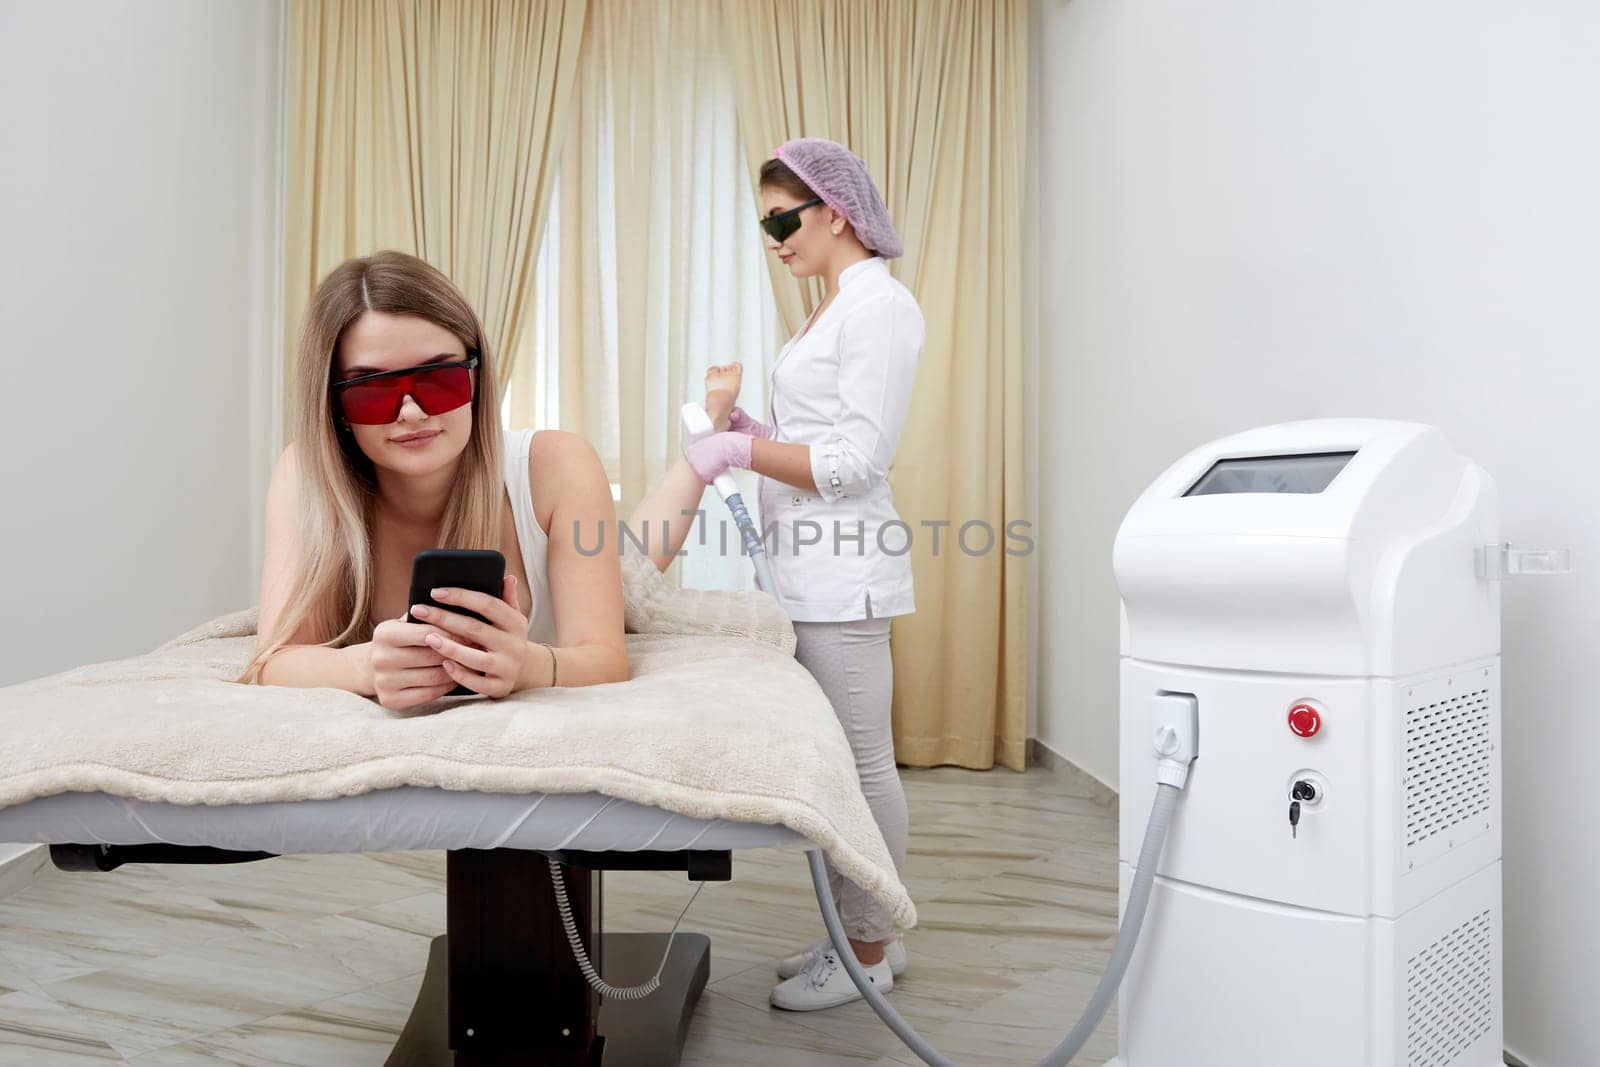 young woman getting laser treatment on her legs, depicting the merging of beauty and modern technology